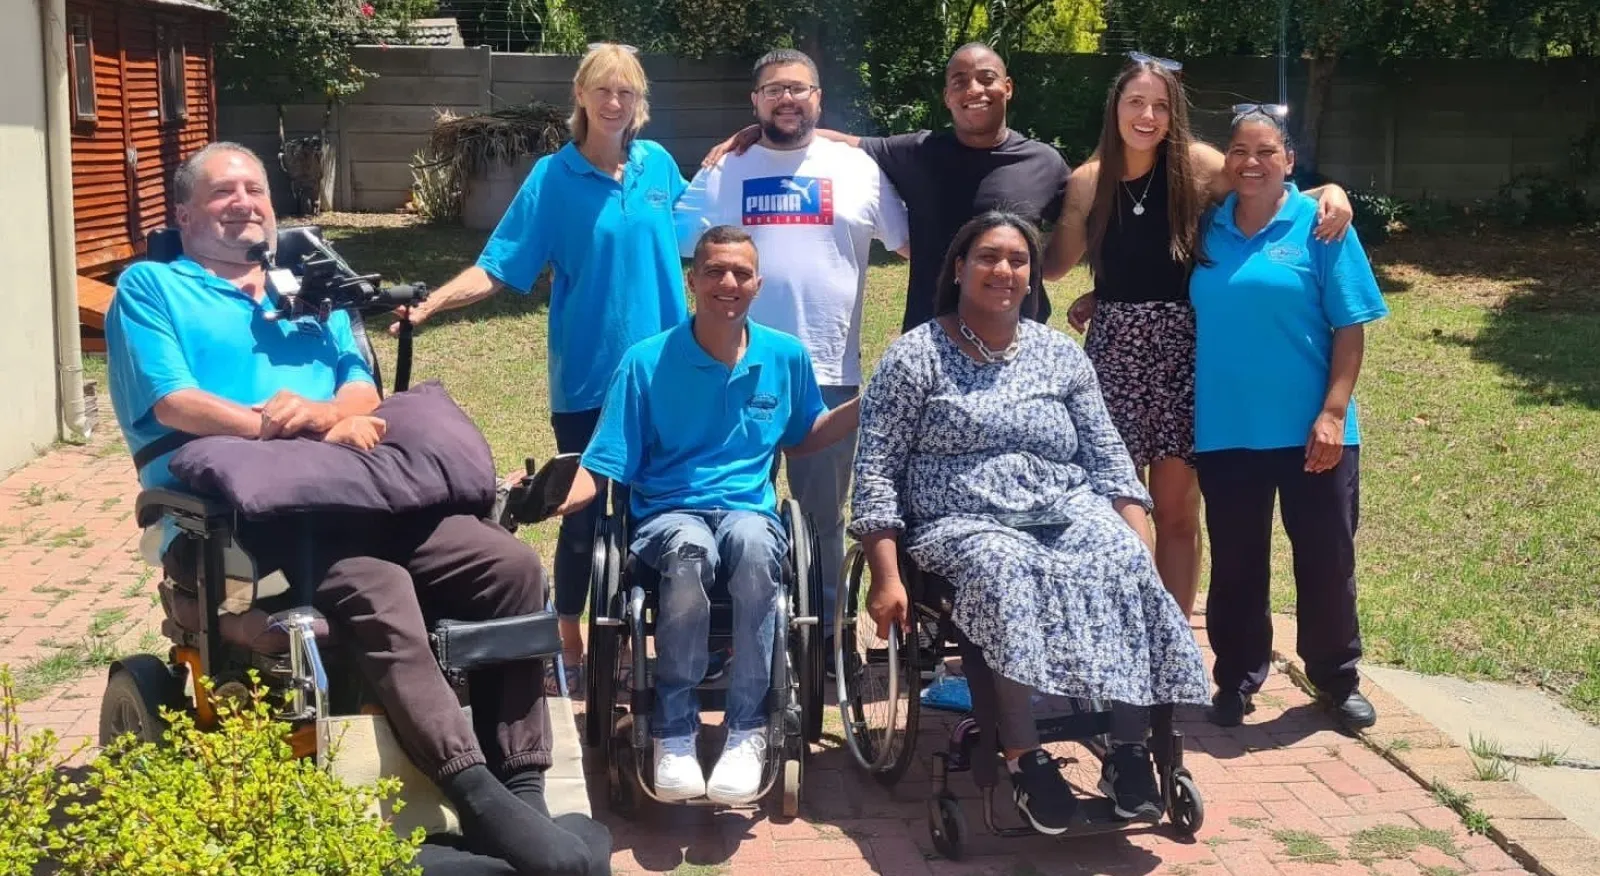 Eight people smiling together in an outdoor setting; three people are in wheelchairs and four people are standing and have arms around each other.